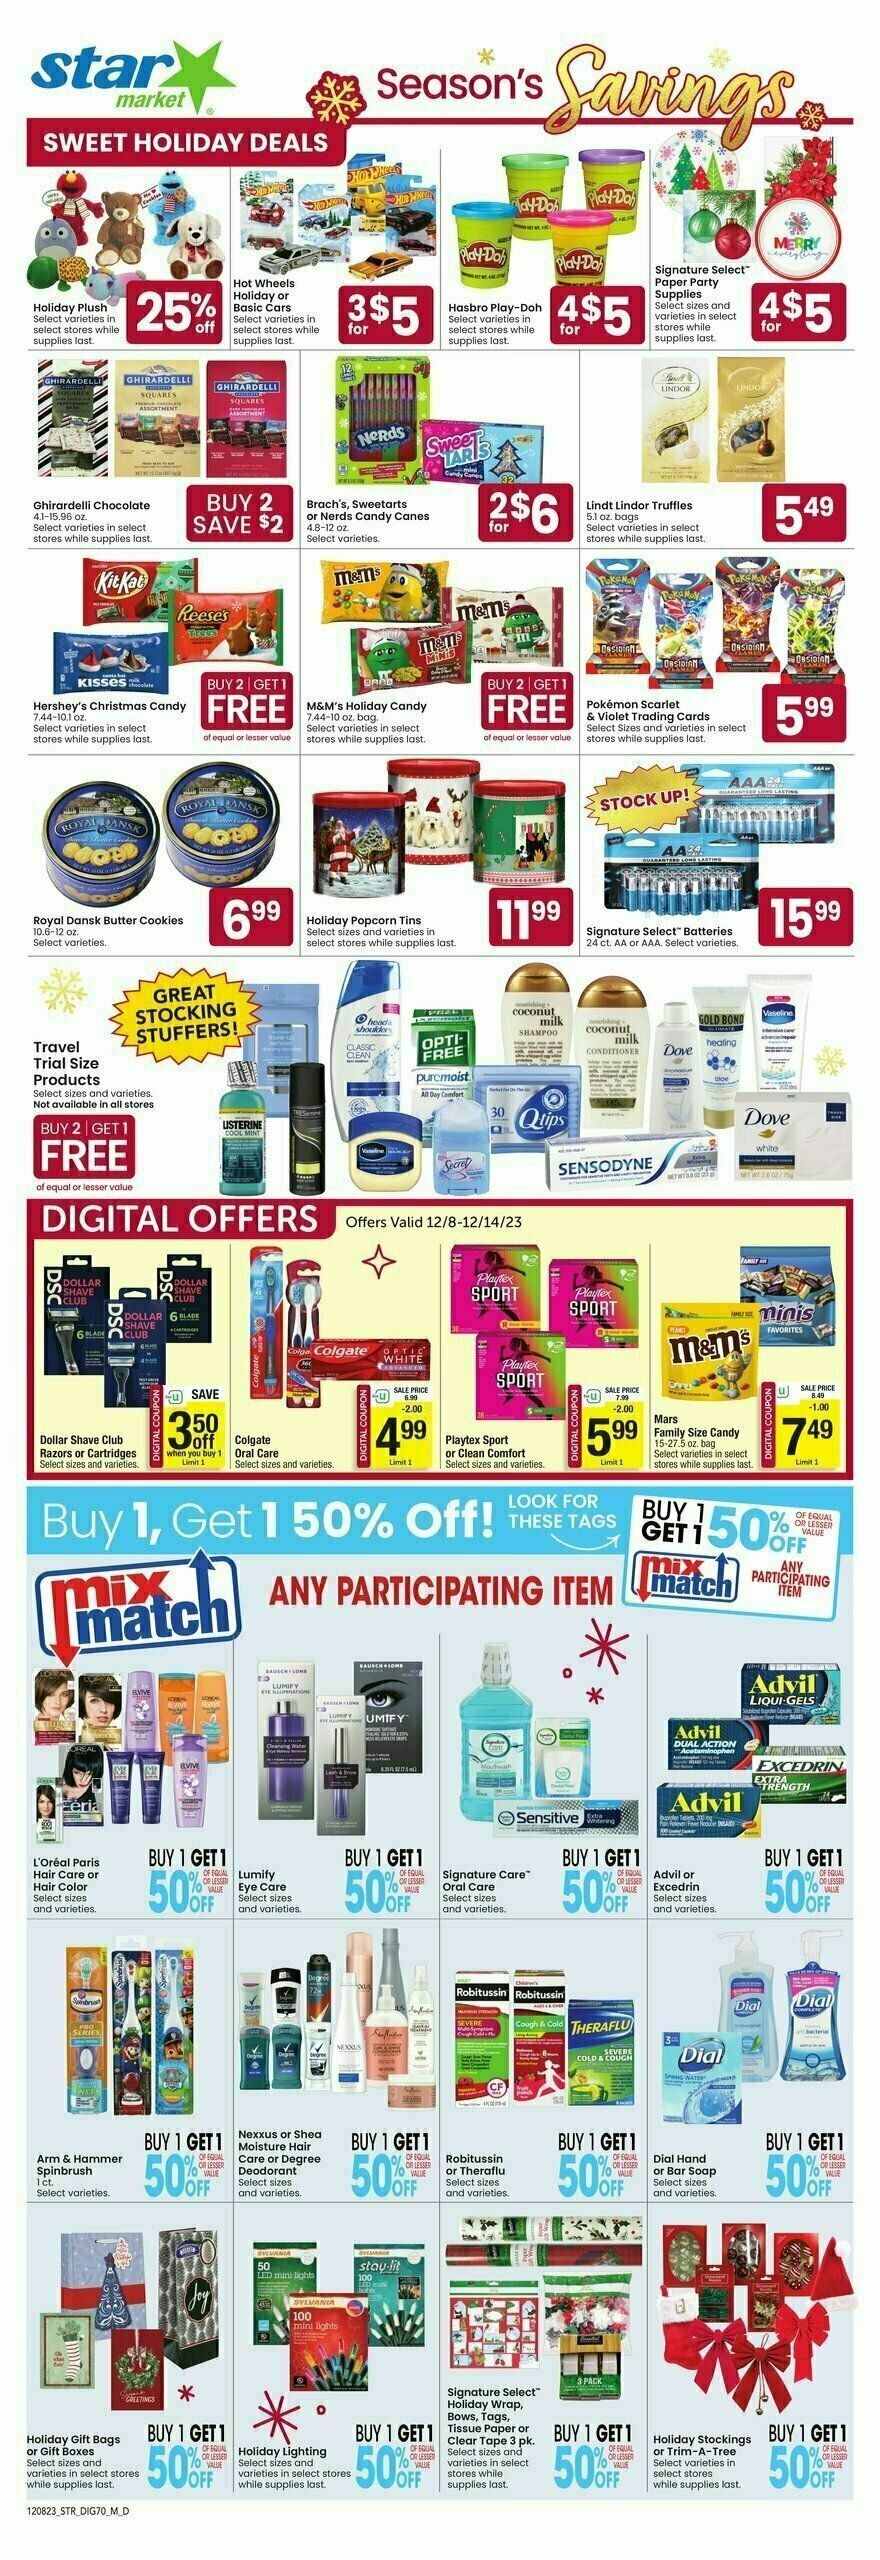 Star Market Additional Savings Weekly Ad from December 8